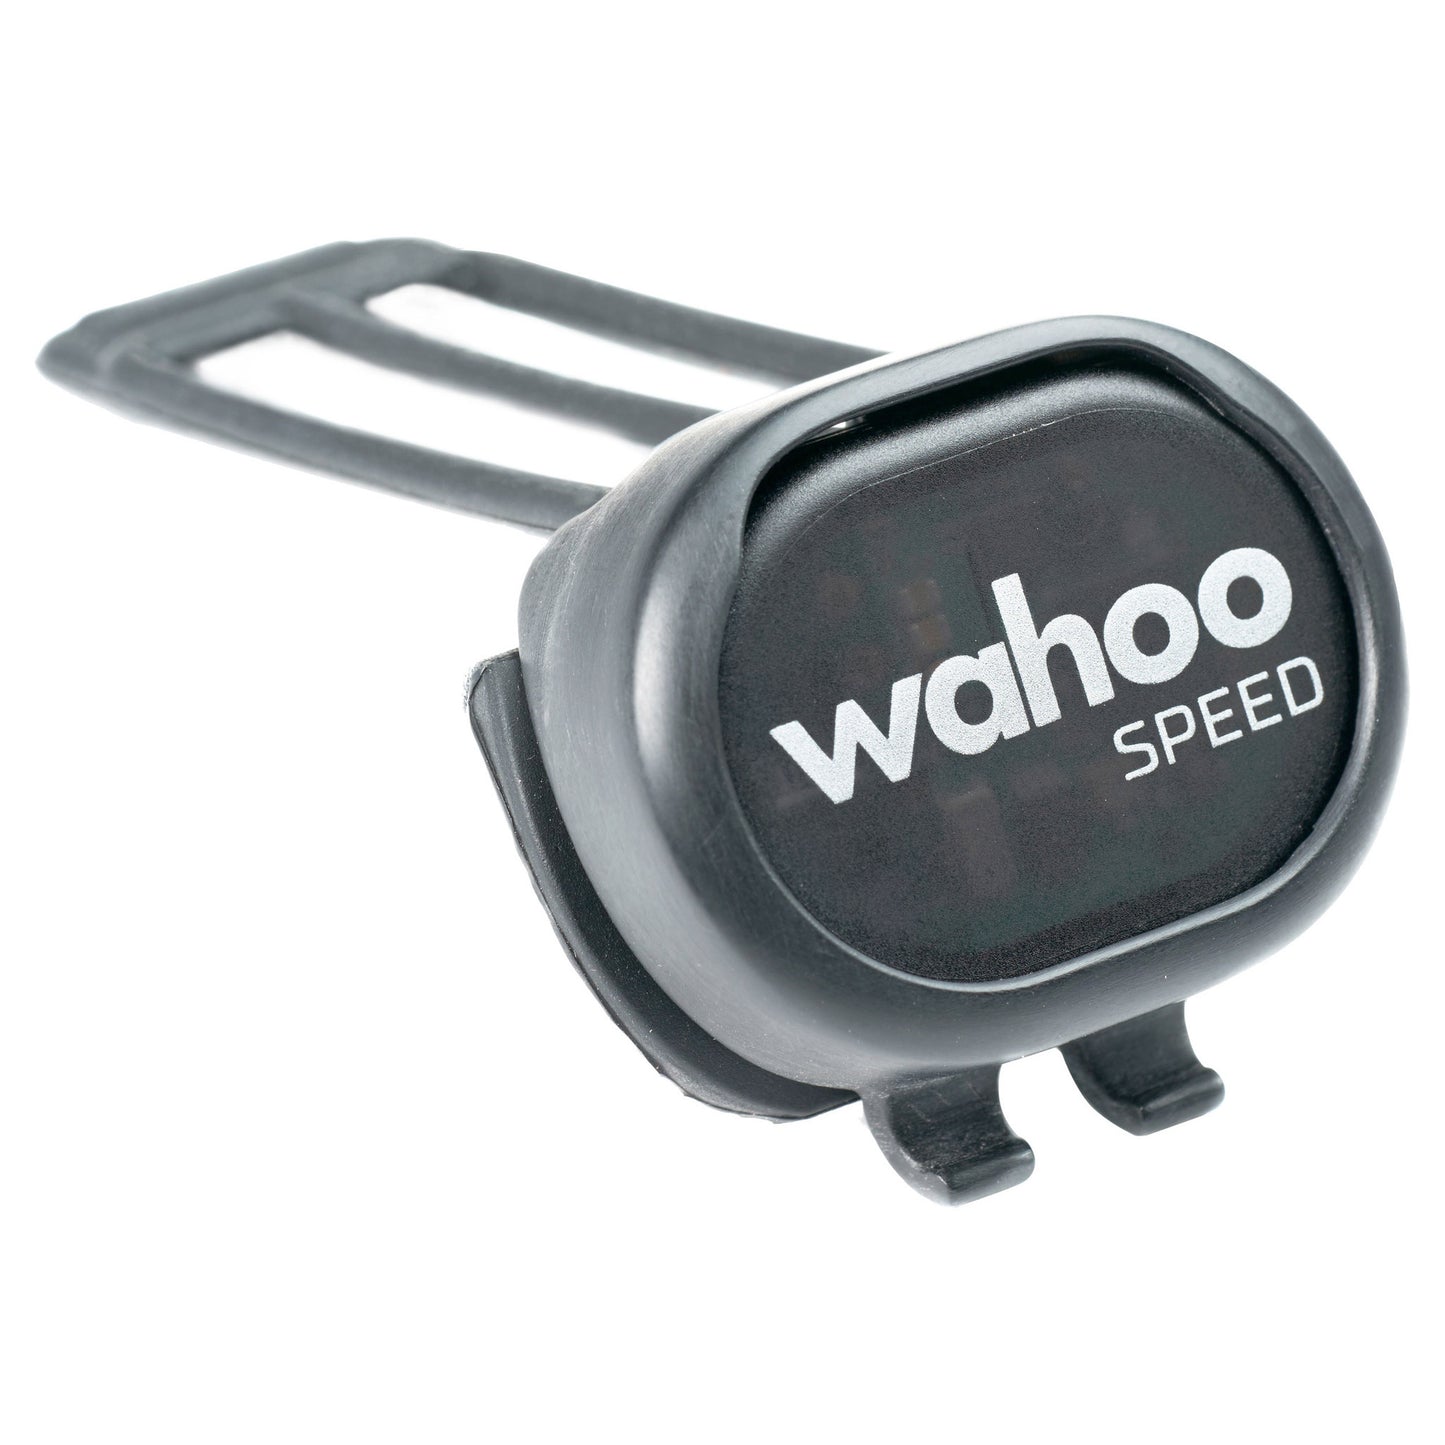 Wahoo RPM Speed Sensor Wireless Bluetooth and ANT+ buy online at Woolys Wheels Sydney